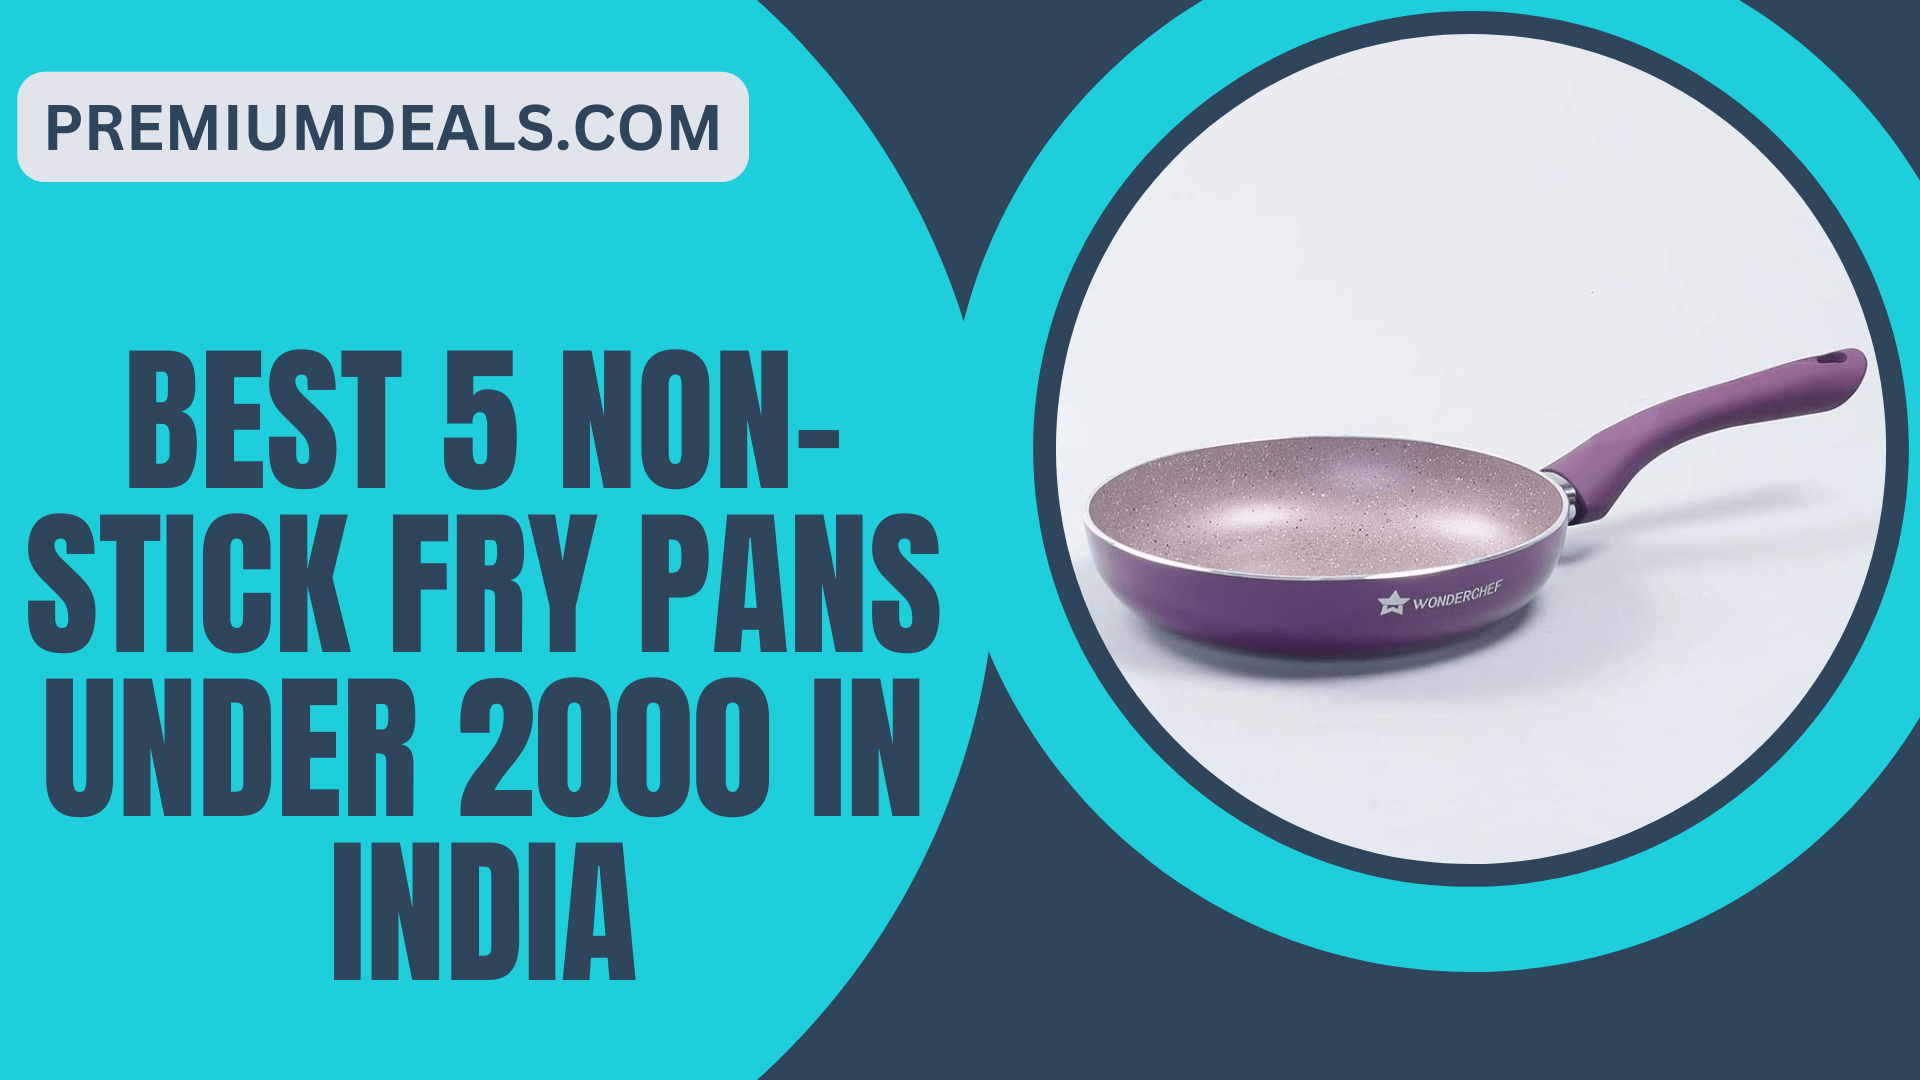 Best 5 Non-Stick Fry Pans Under 2000 In India